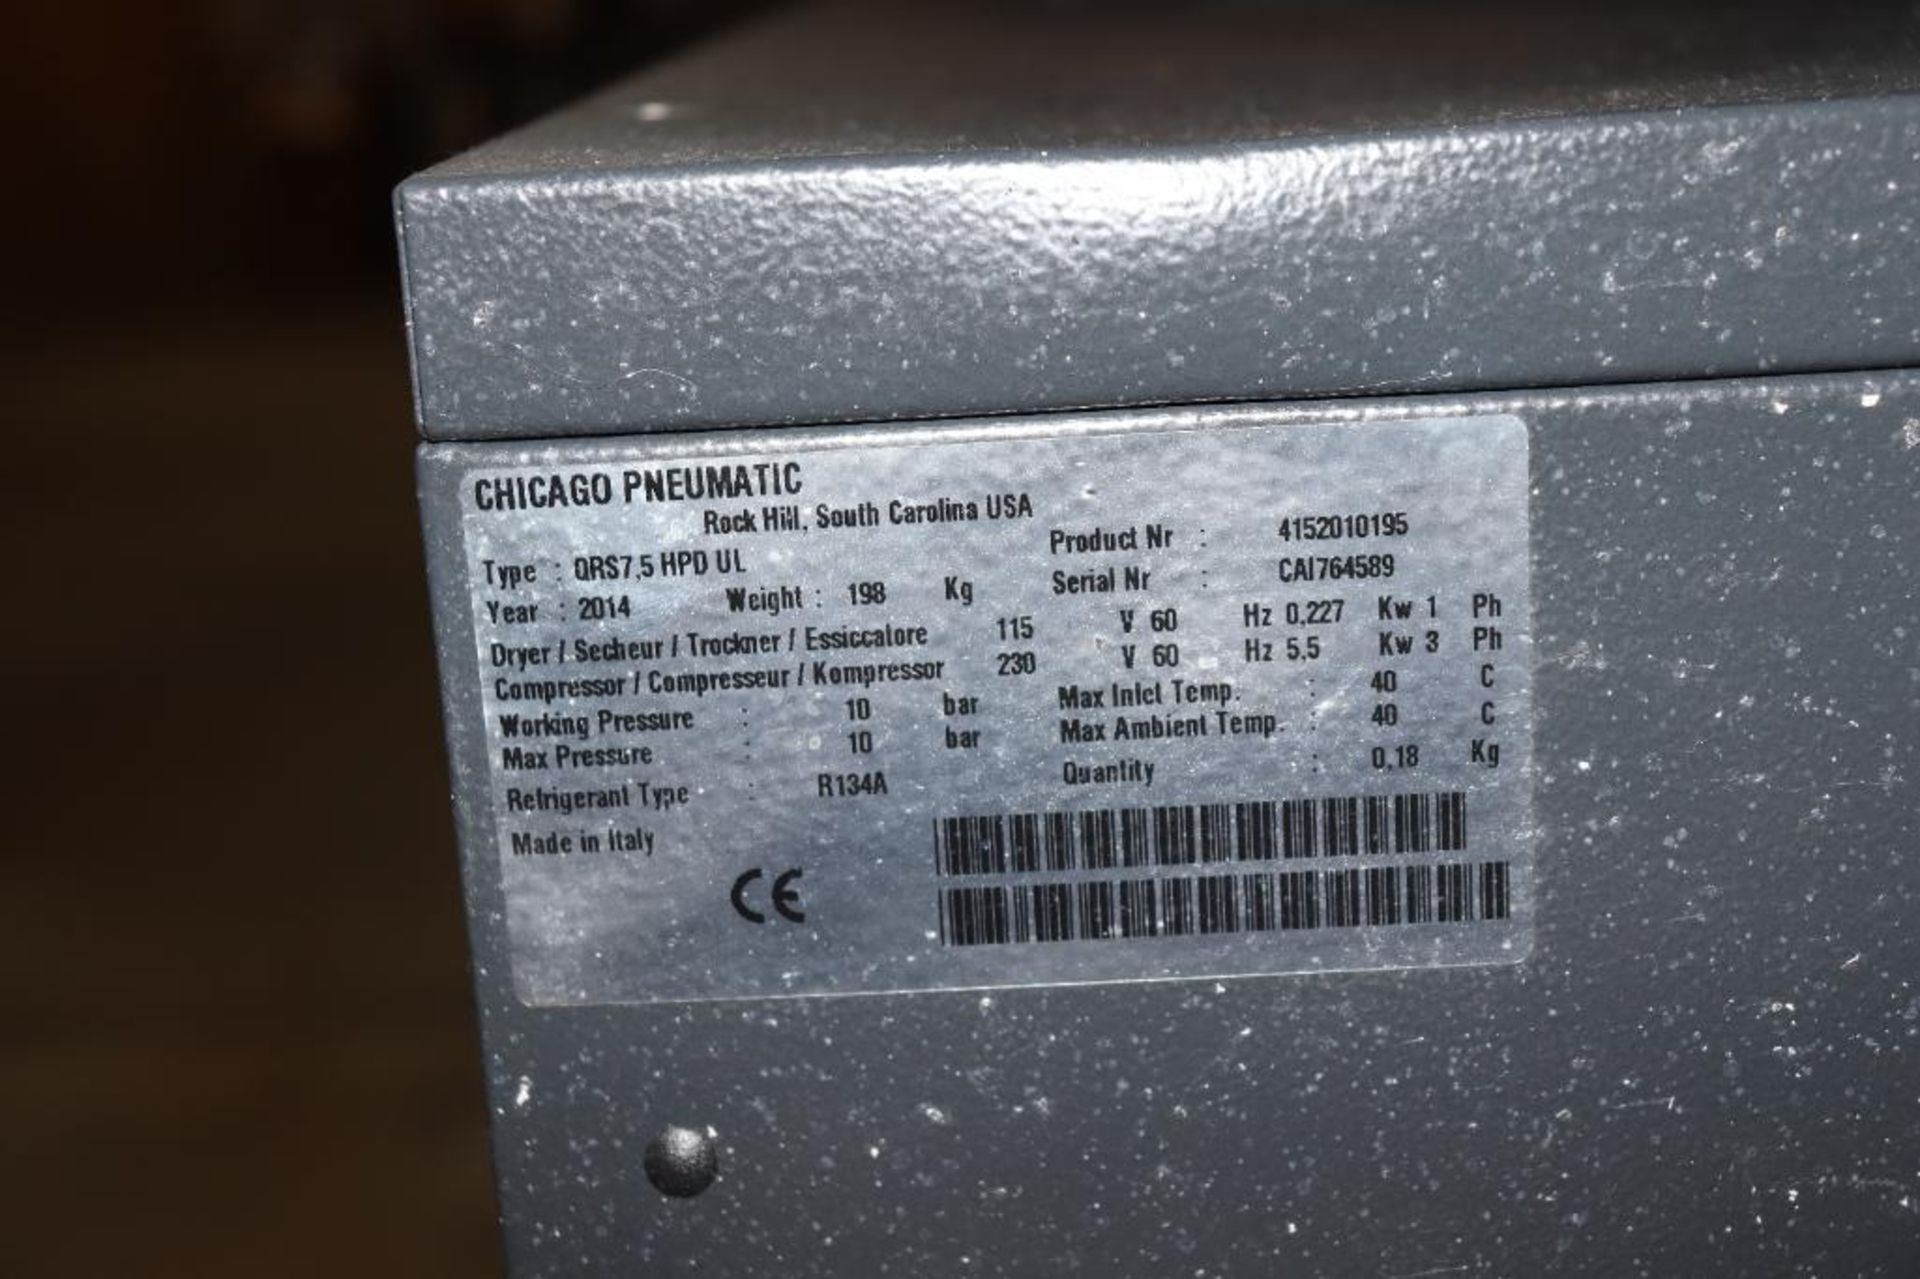 Chicago Pneumatic QRS 7.5 rotary screw air compressor w/ dryer - Image 6 of 8